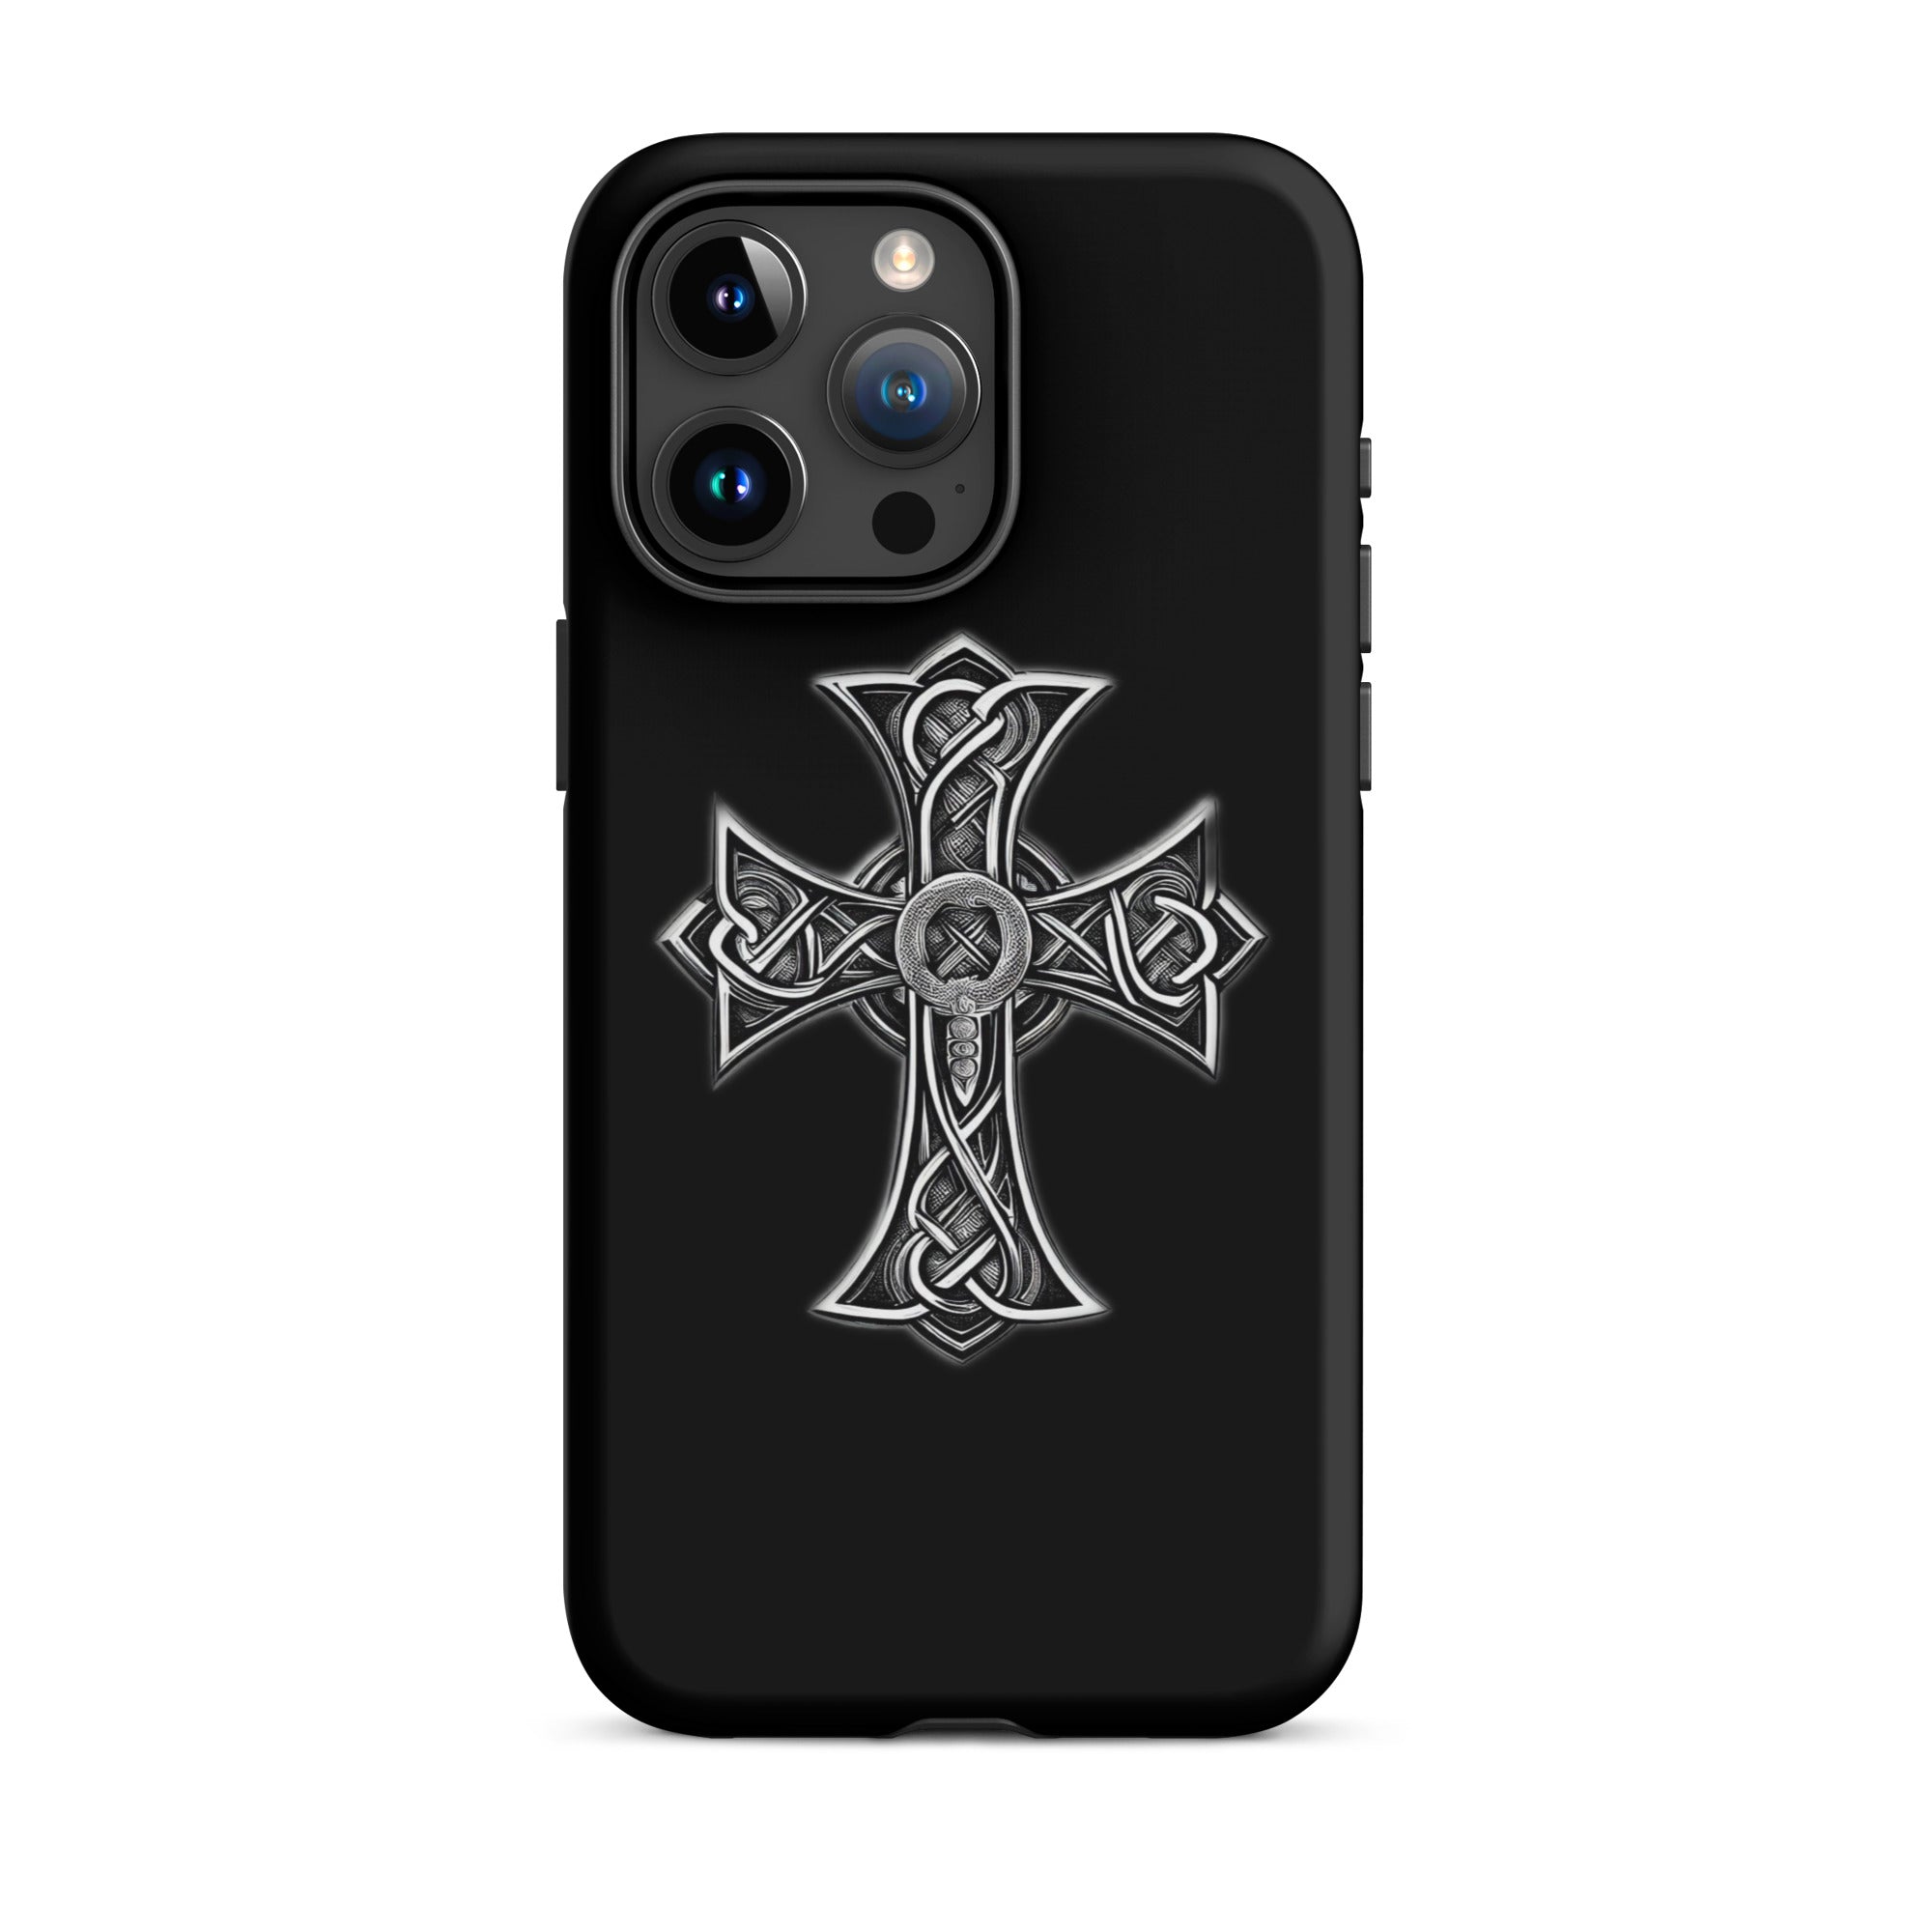 tough-case-for-iphone-matte-iphone-15-pro-max-front-6563851a38398.jpg